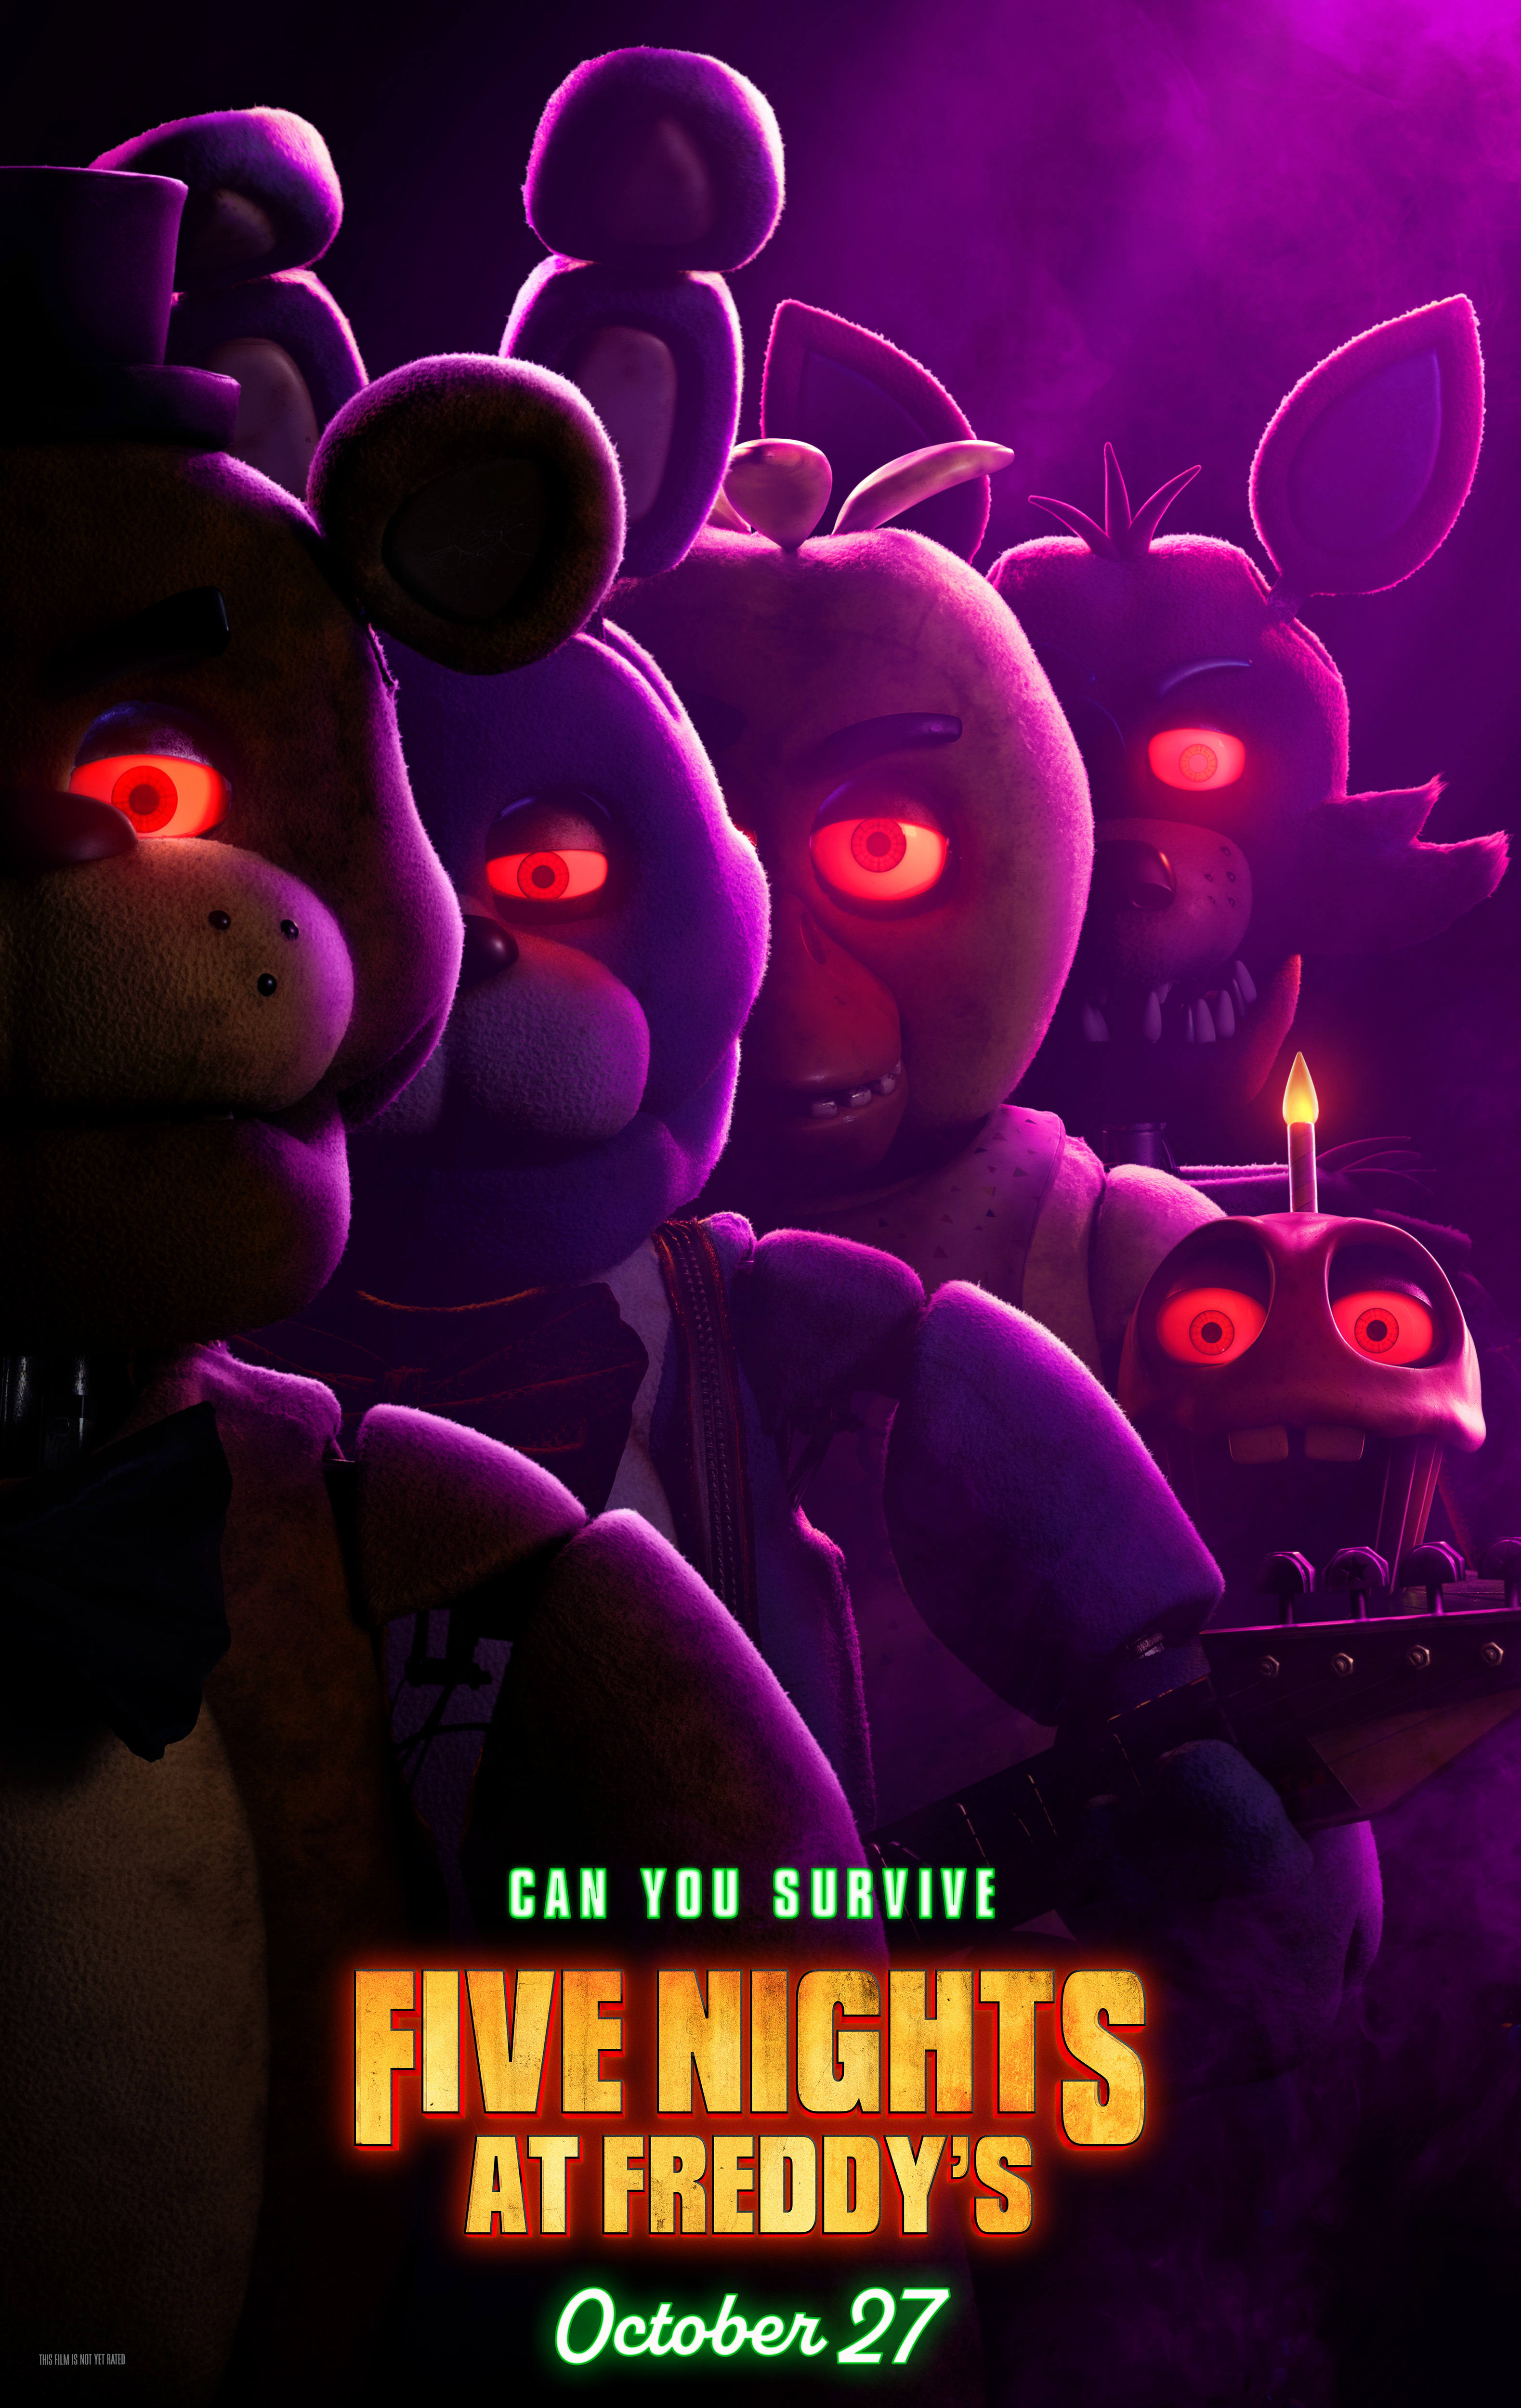 Five Nights at Freddy's themed phone wallpaper featuring the eerie animatronic characters under a purple hue with the text 'Can you survive' and release date 'October 27'.